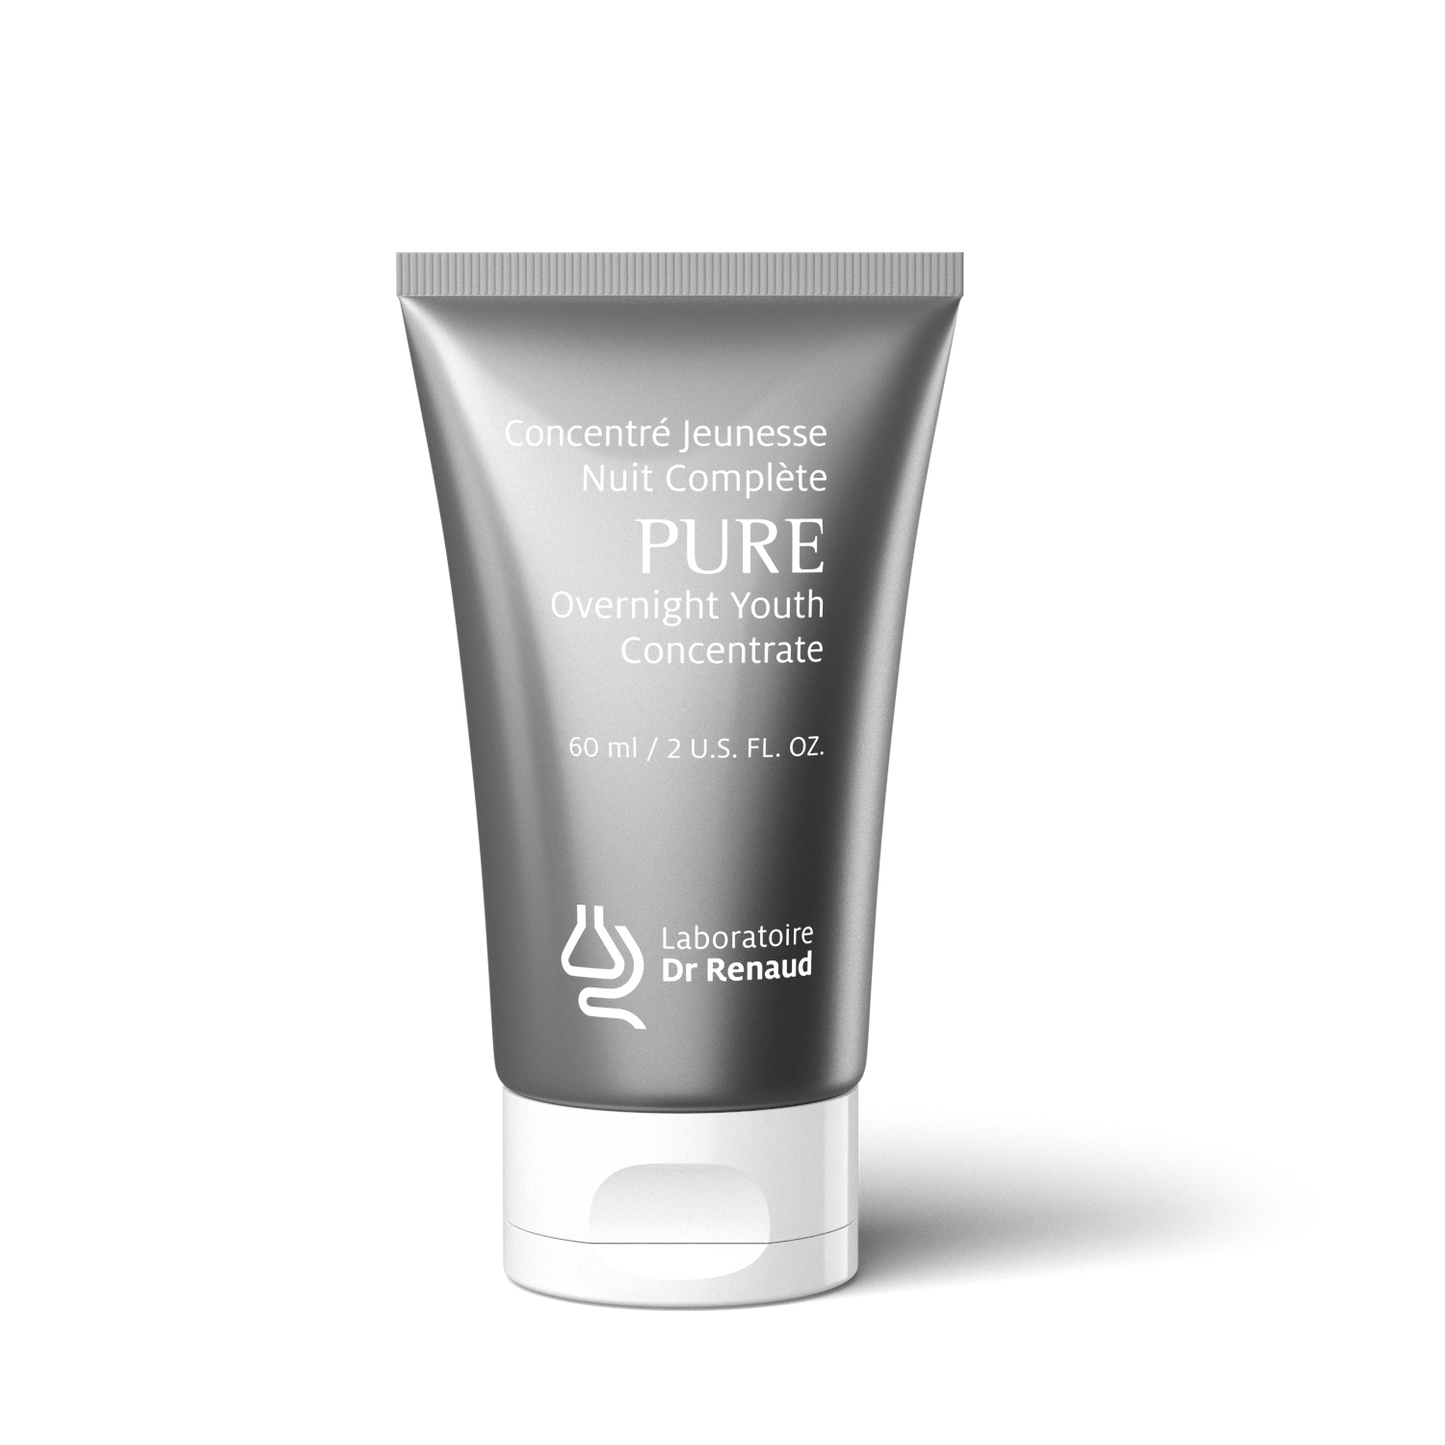 Dr. Renaud - PURE Overnight Youth Concentrate